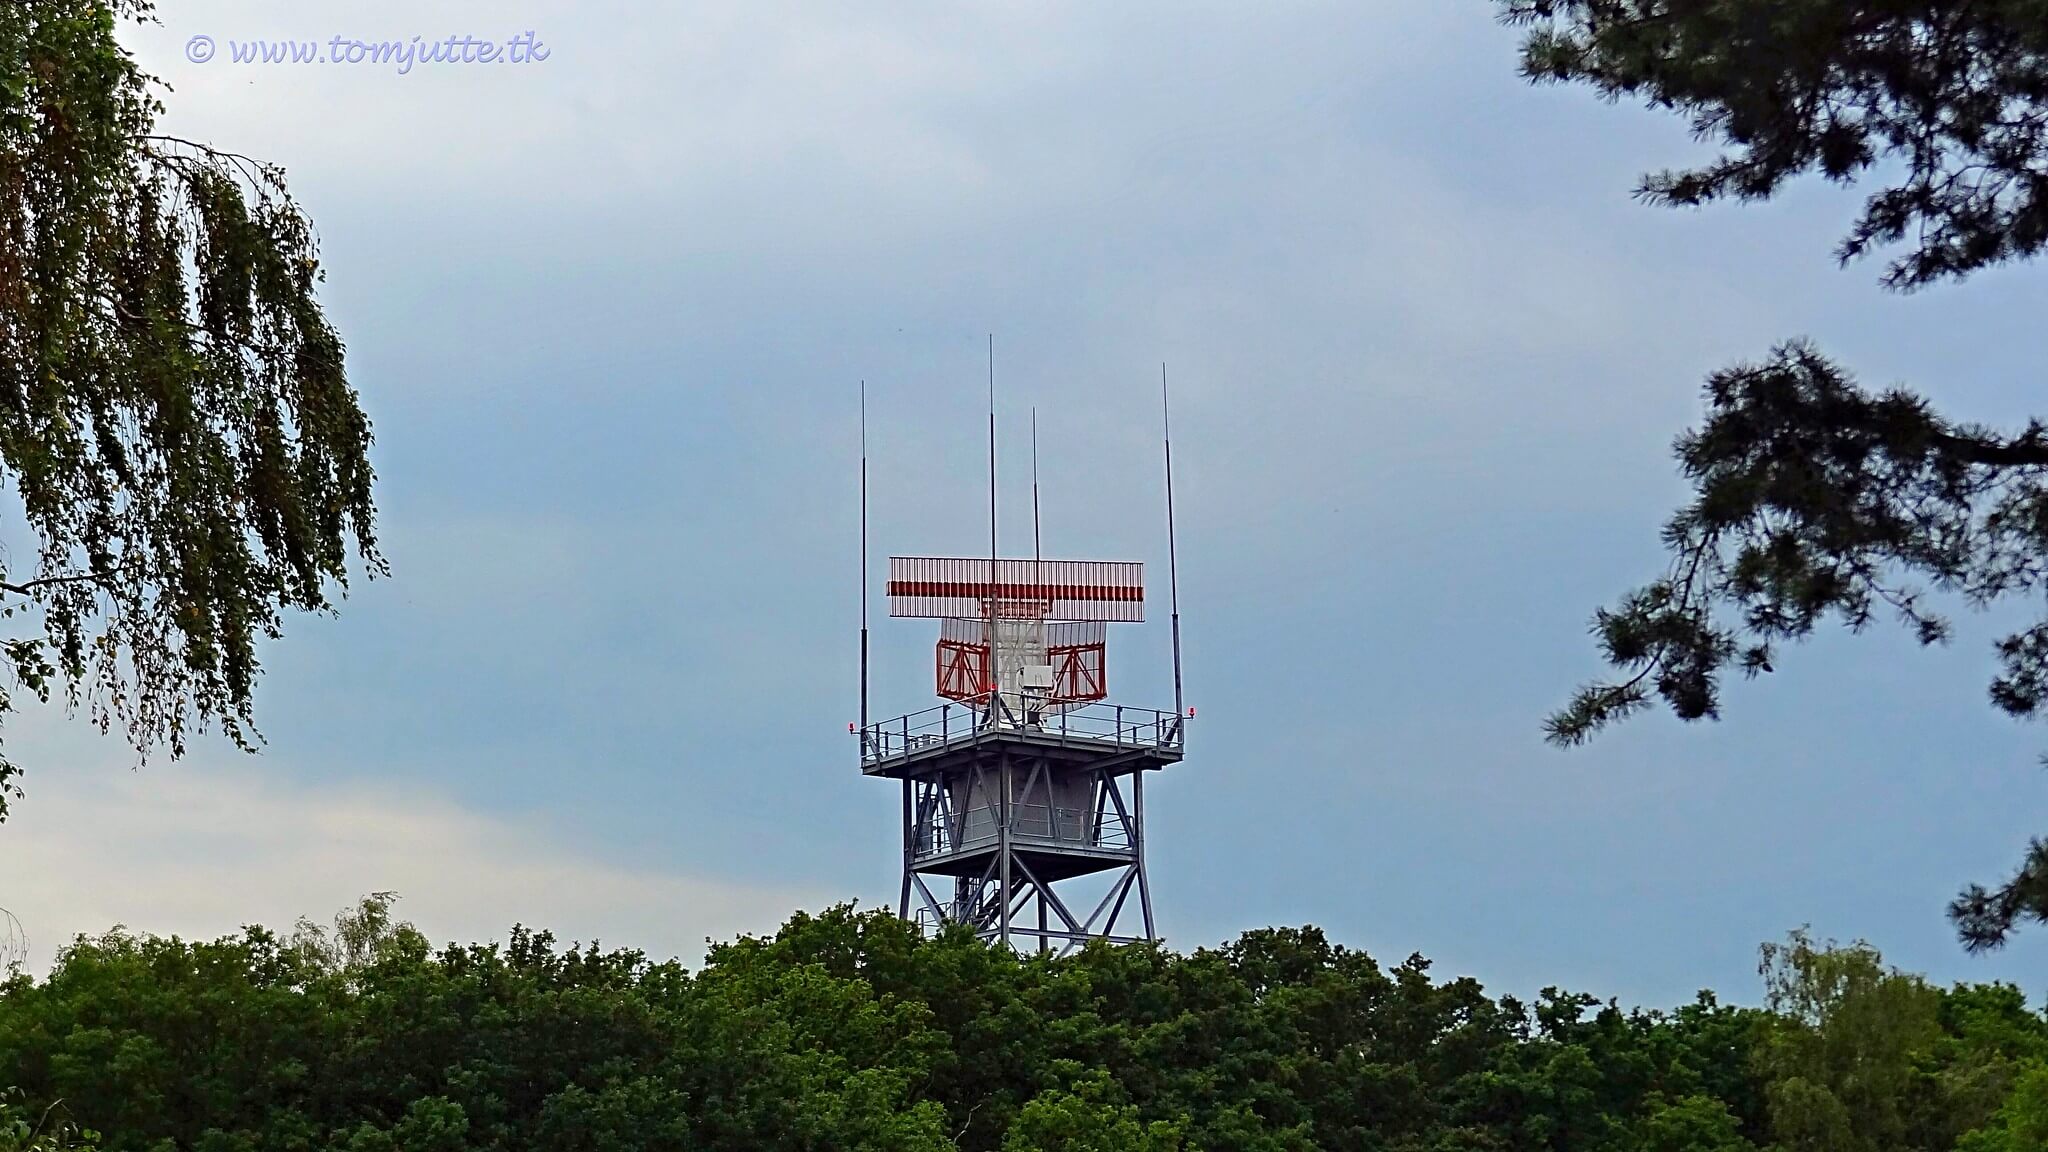 Radar Tower at a former Royal Netherlands Air Force military airbase located in Soesterberg, 2014. Tom Jutte - Flickr